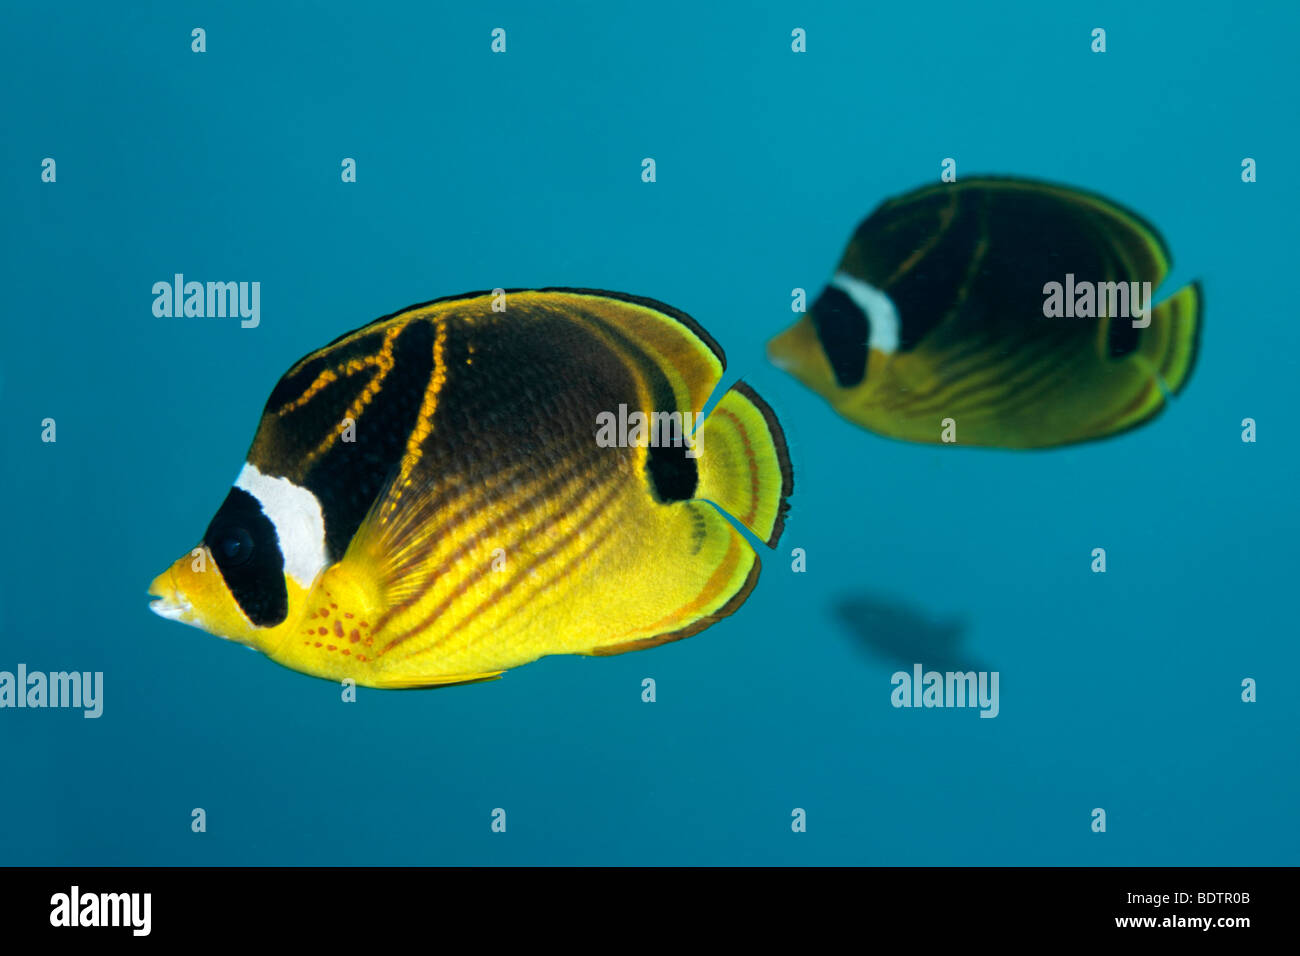 Pair of Raccoon Butterflyfish (Chaetodon lunula), swimming in the blue water, Tulamben, Bali, Indonesia, Indian Ocean, Asia Stock Photo